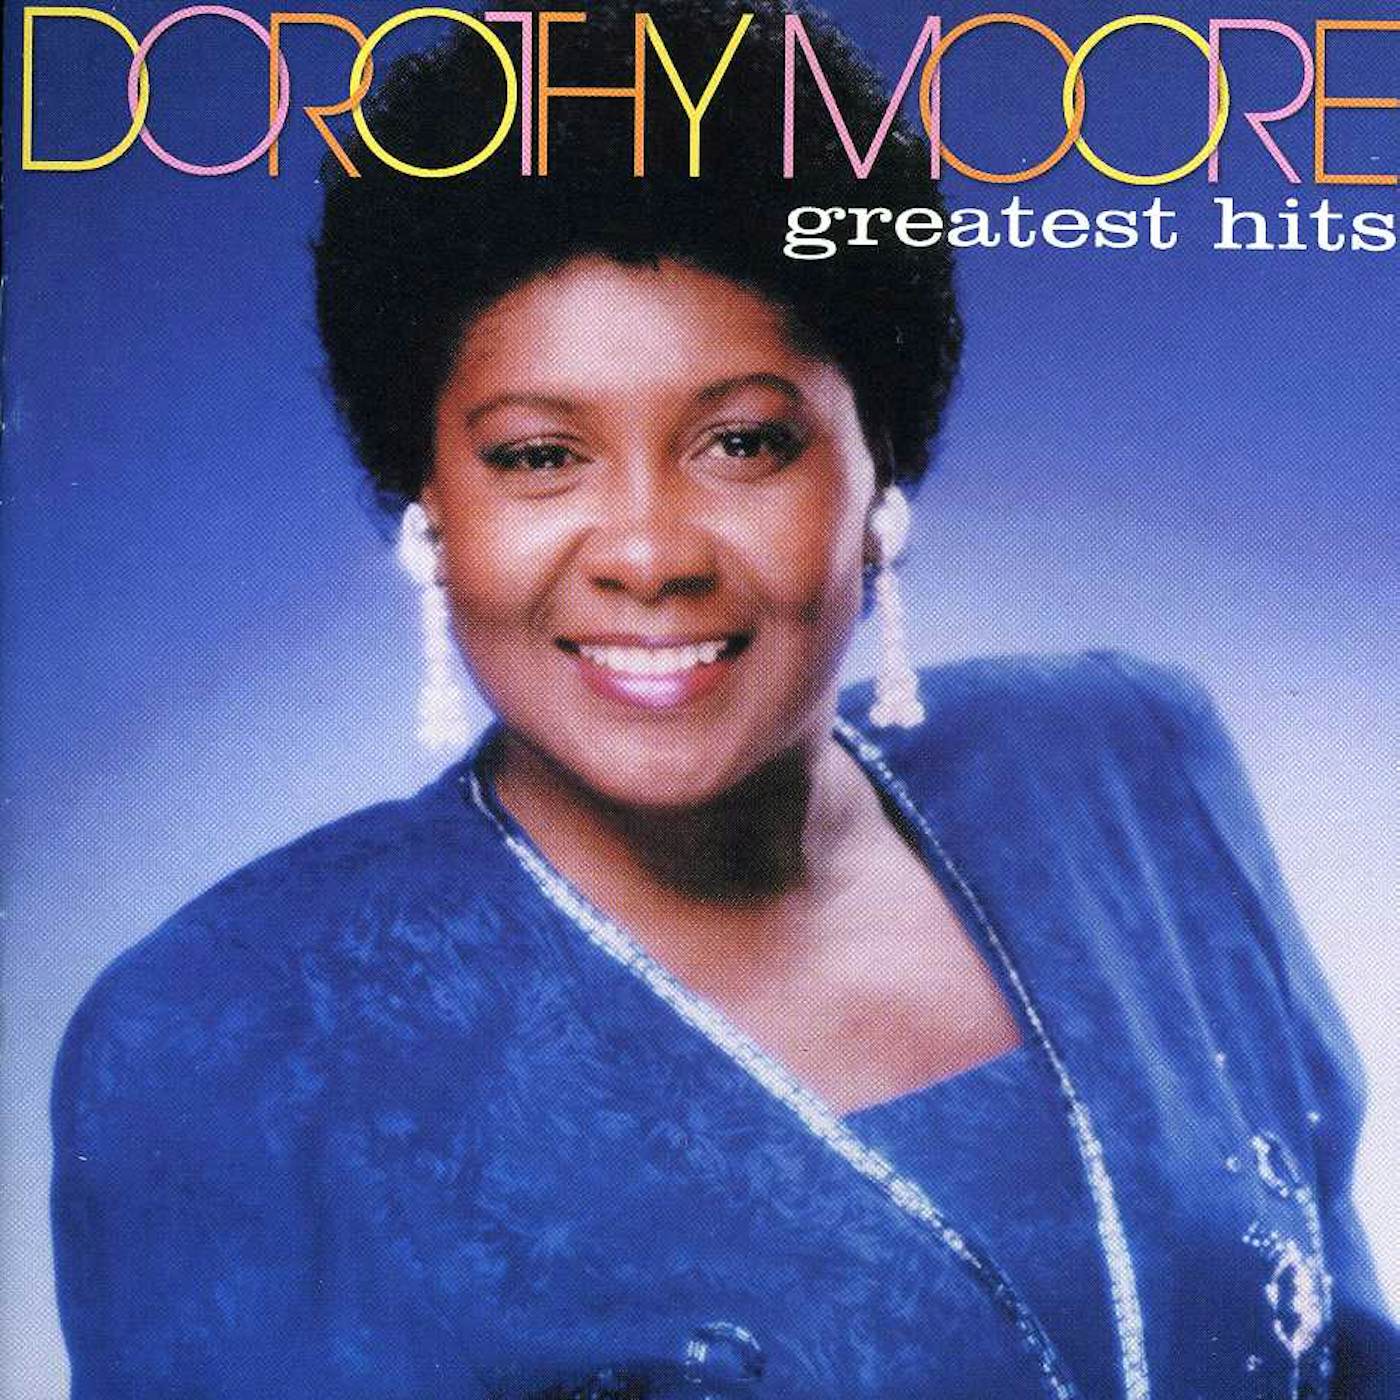 Dorothy Moore GREATEST HITS CD